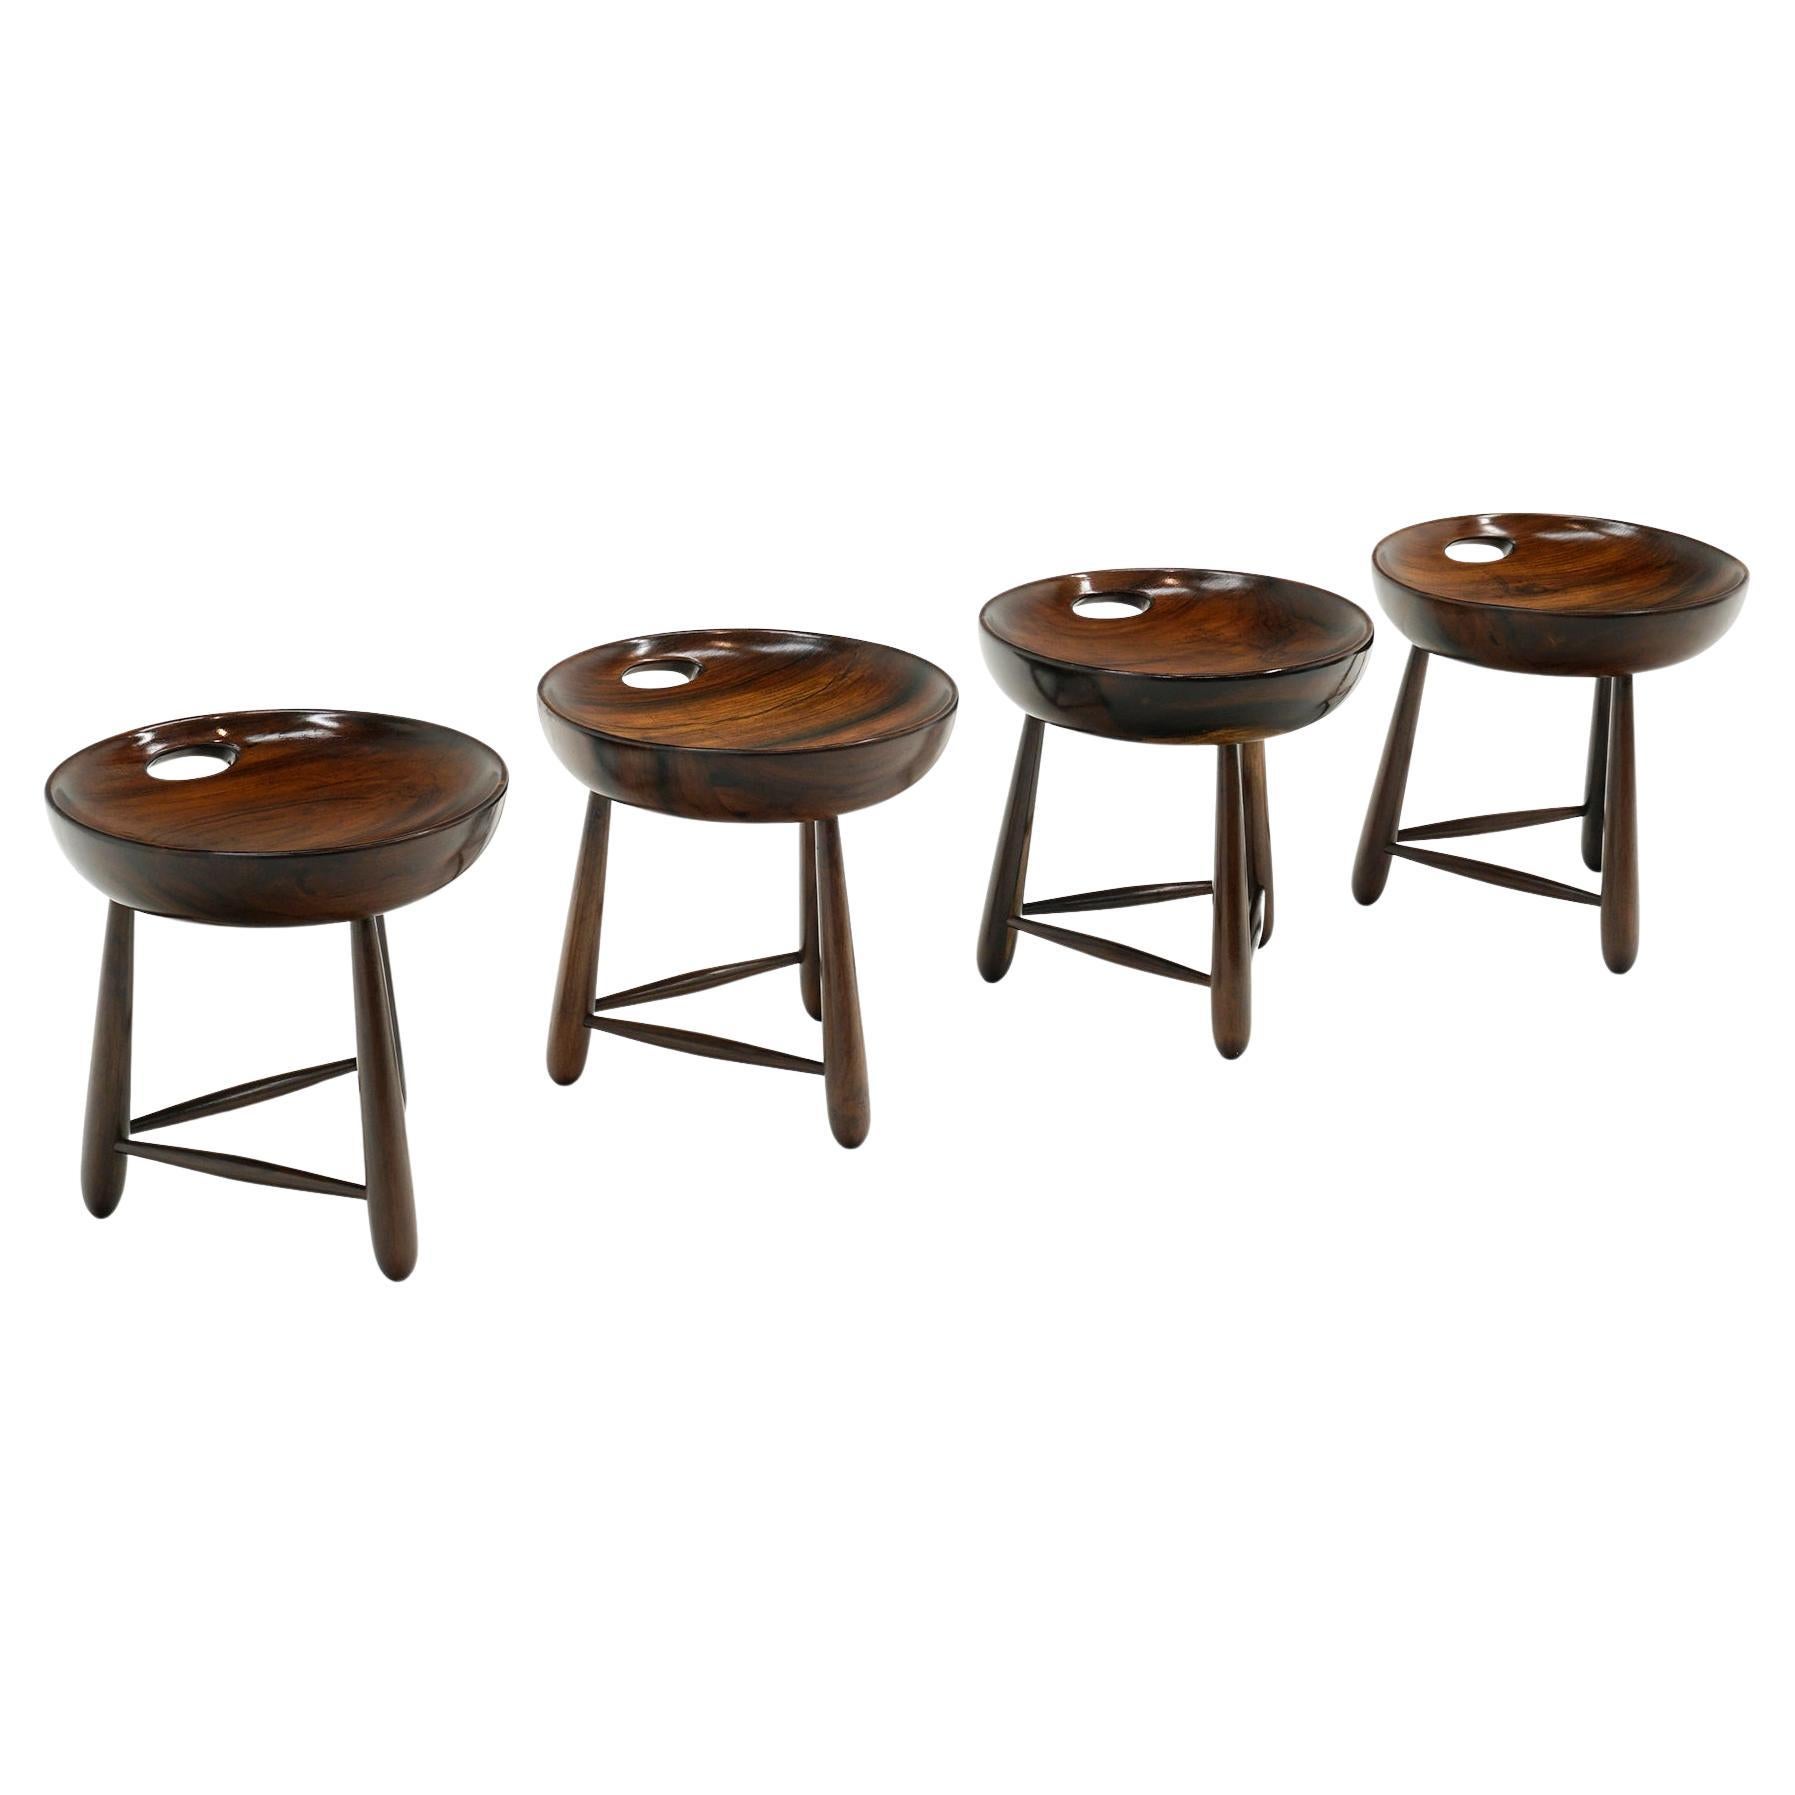 Mocho Stool in Rosewood by  Sergio Rodrigues for Oca, Brazil, 1954. Signed. For Sale